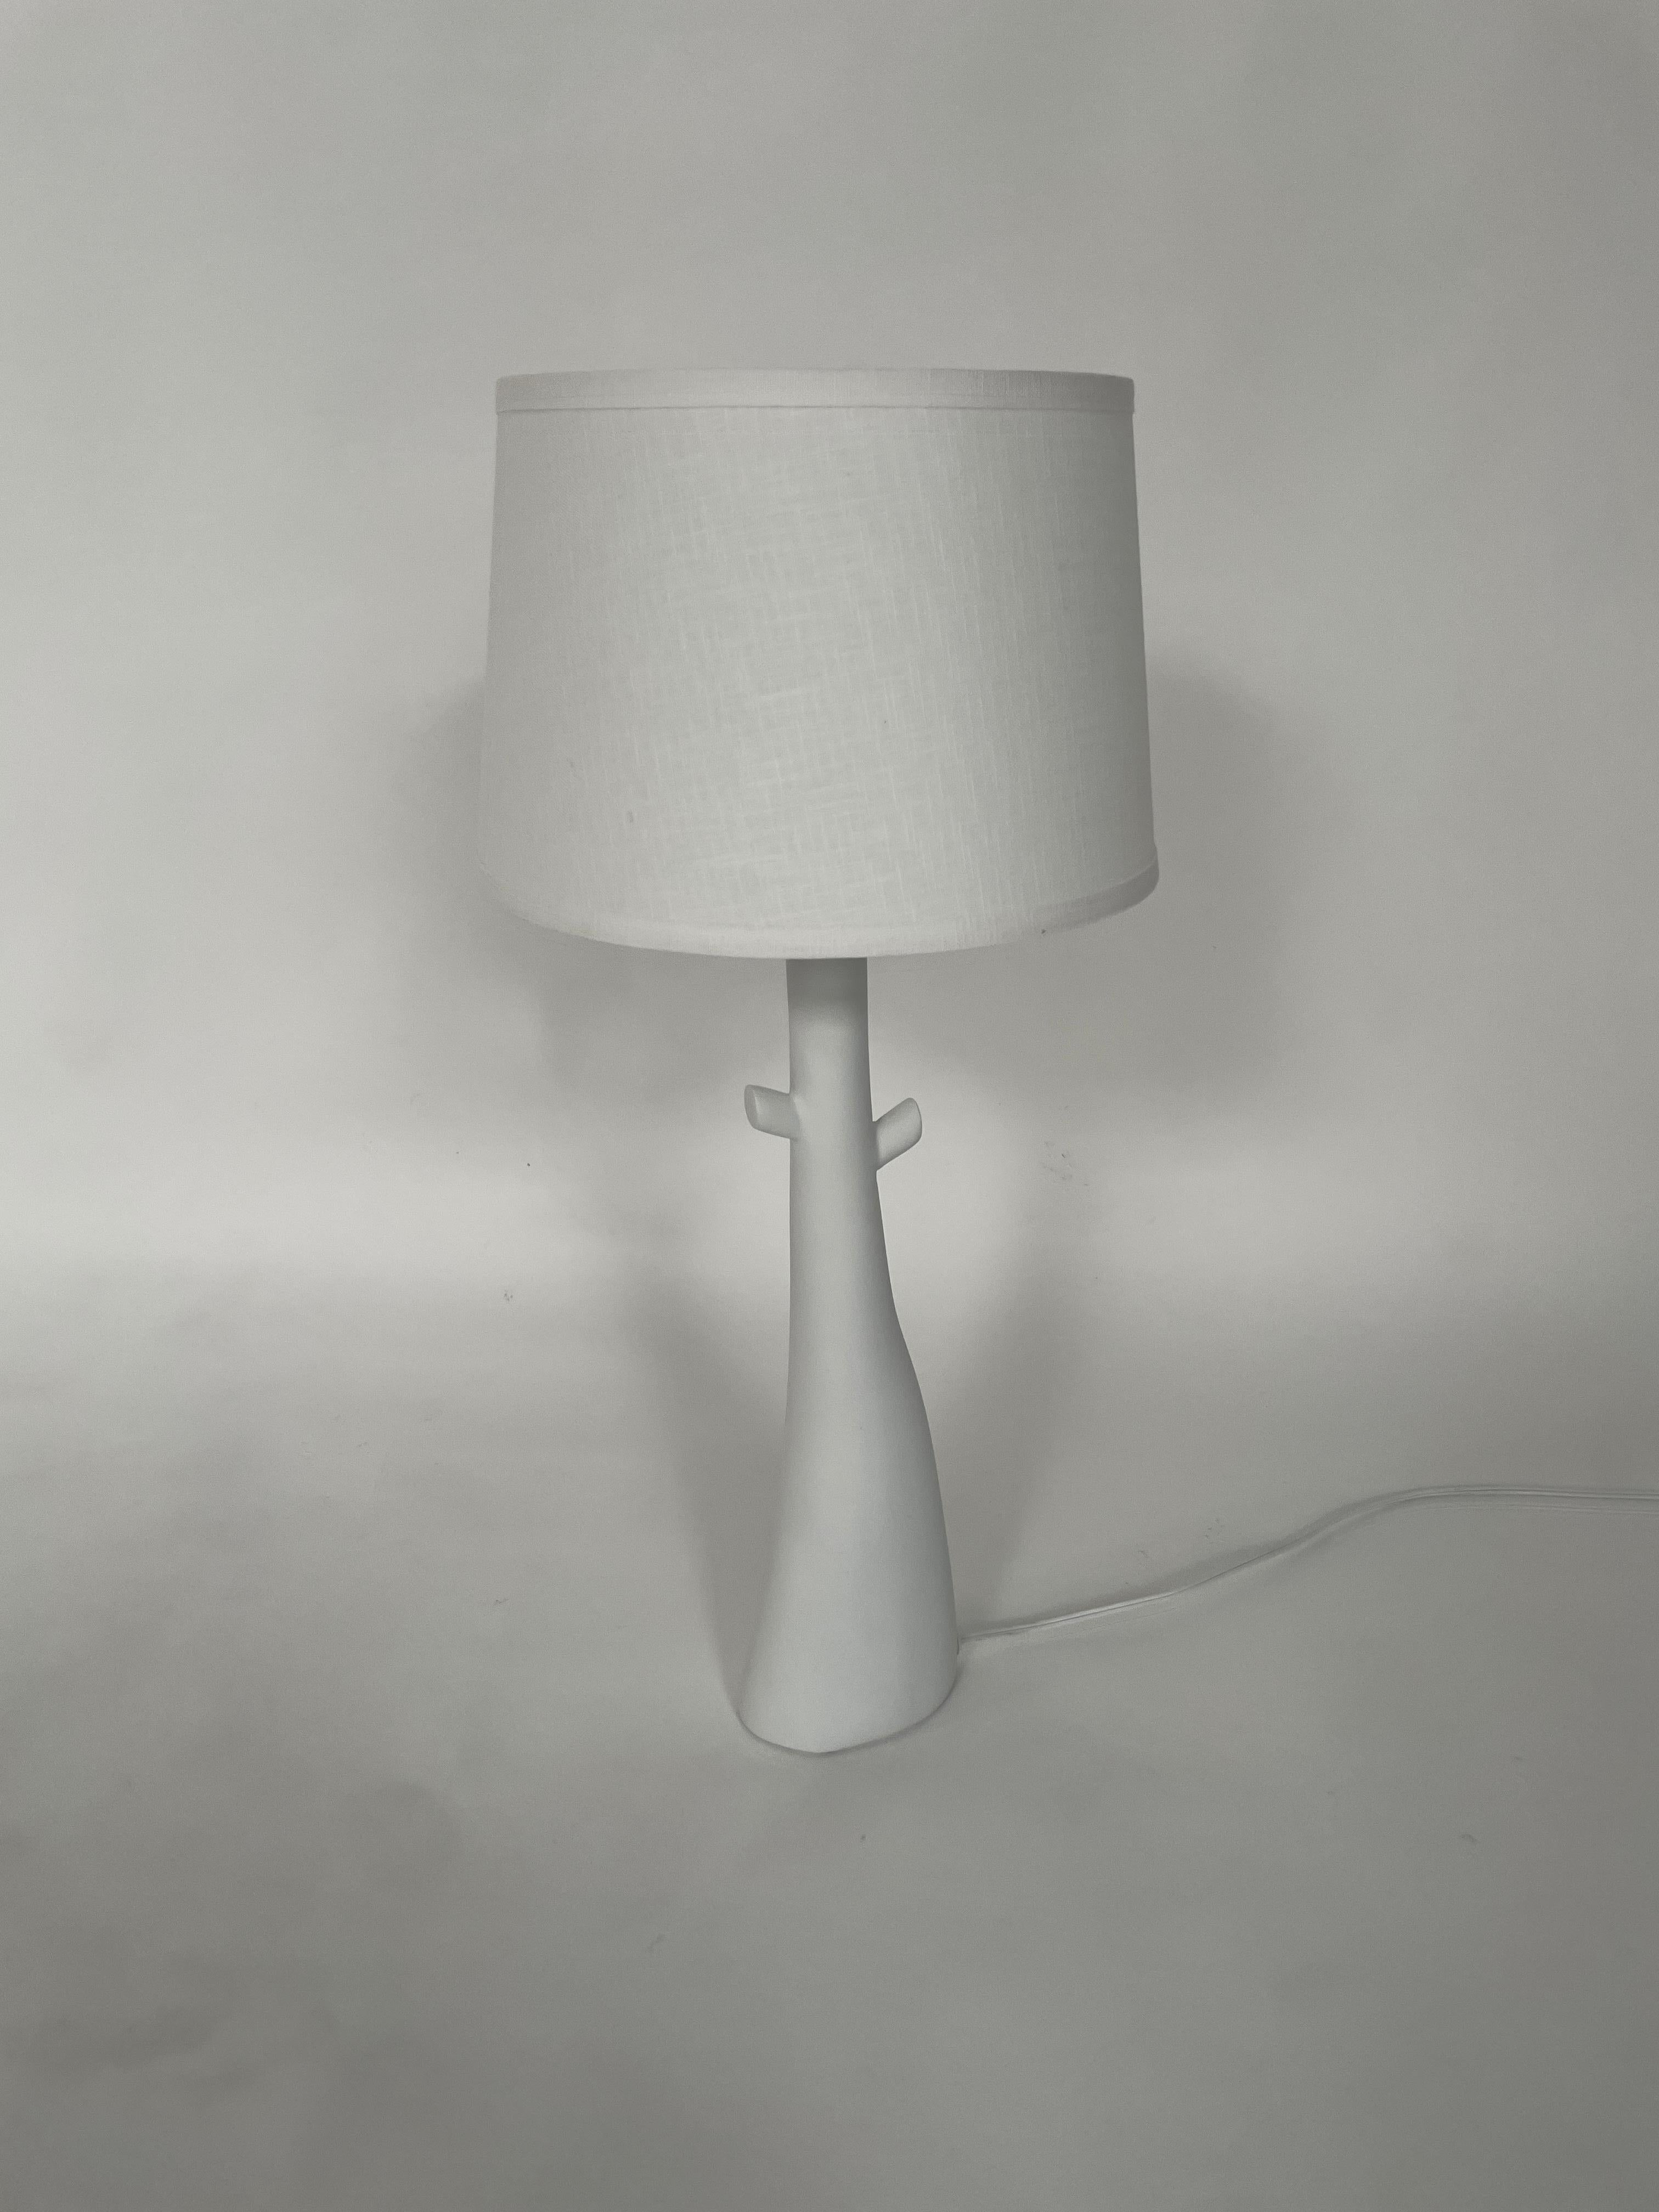 Monceau Table Lamp, by Bourgeois Boheme Atelier In New Condition For Sale In Los Angeles, CA